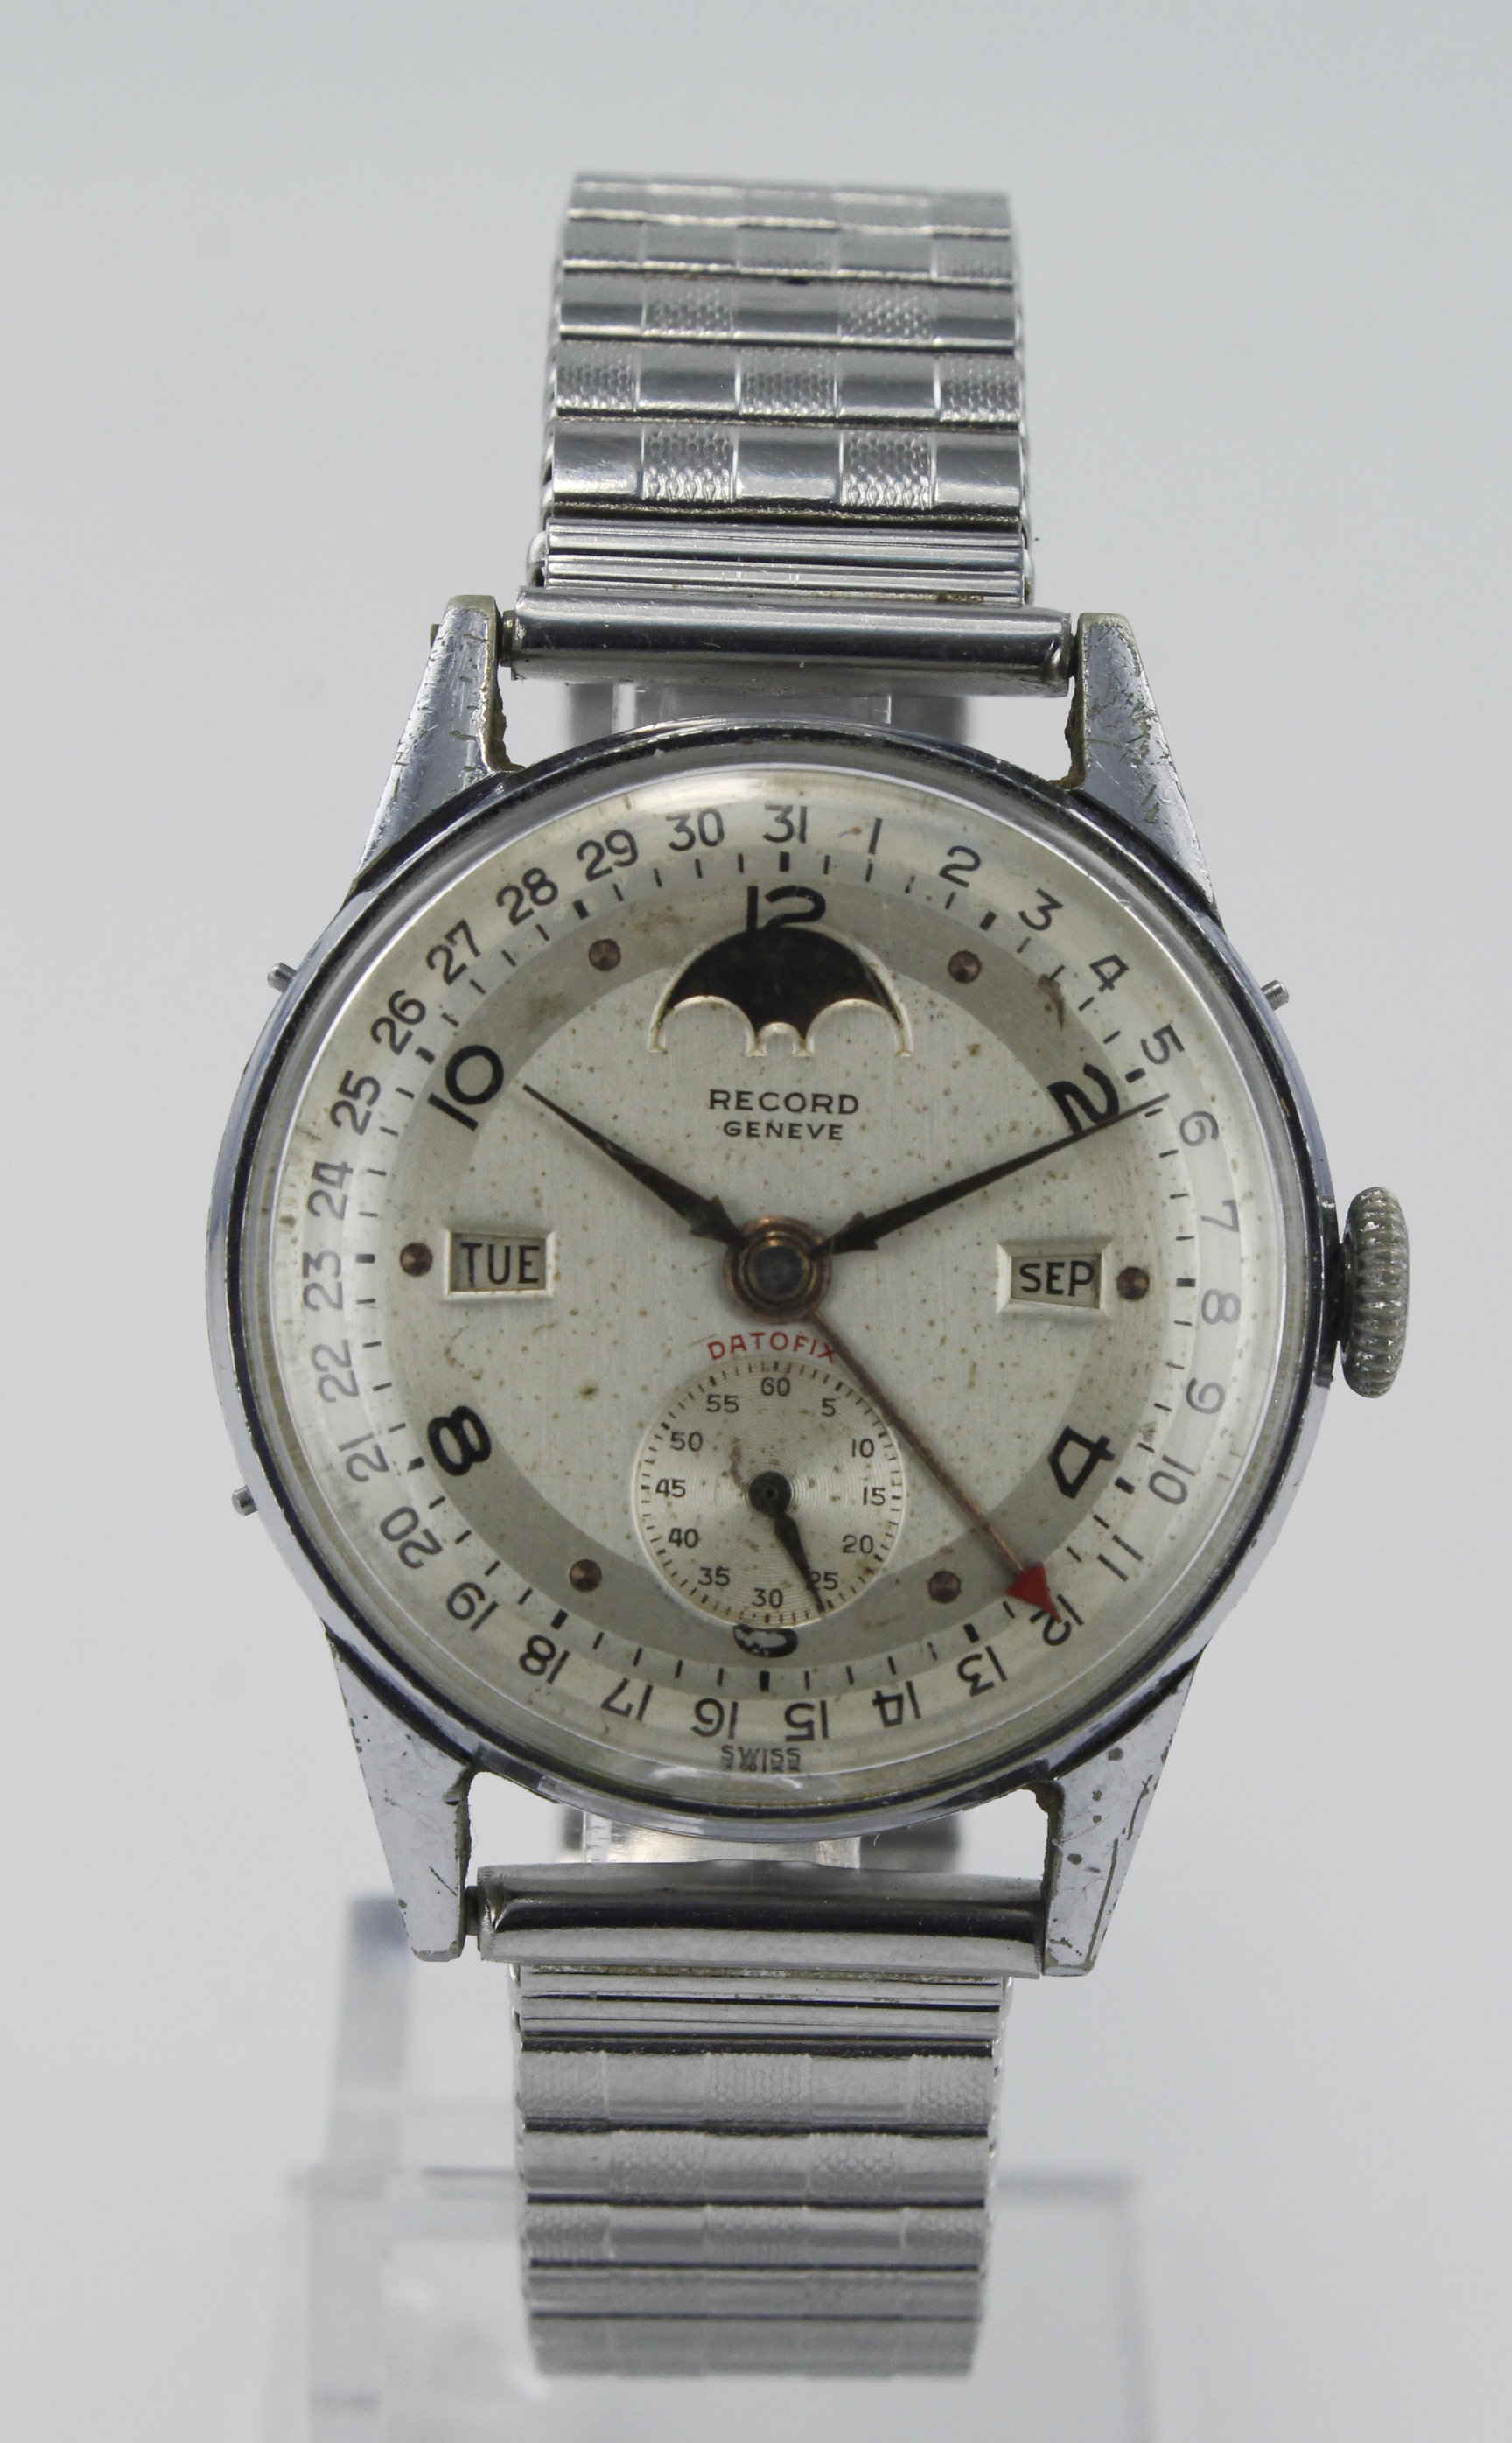 Gents stainless steel cased Record Datofix manual wind wristwatch, case no. 11273, circa 1950s.